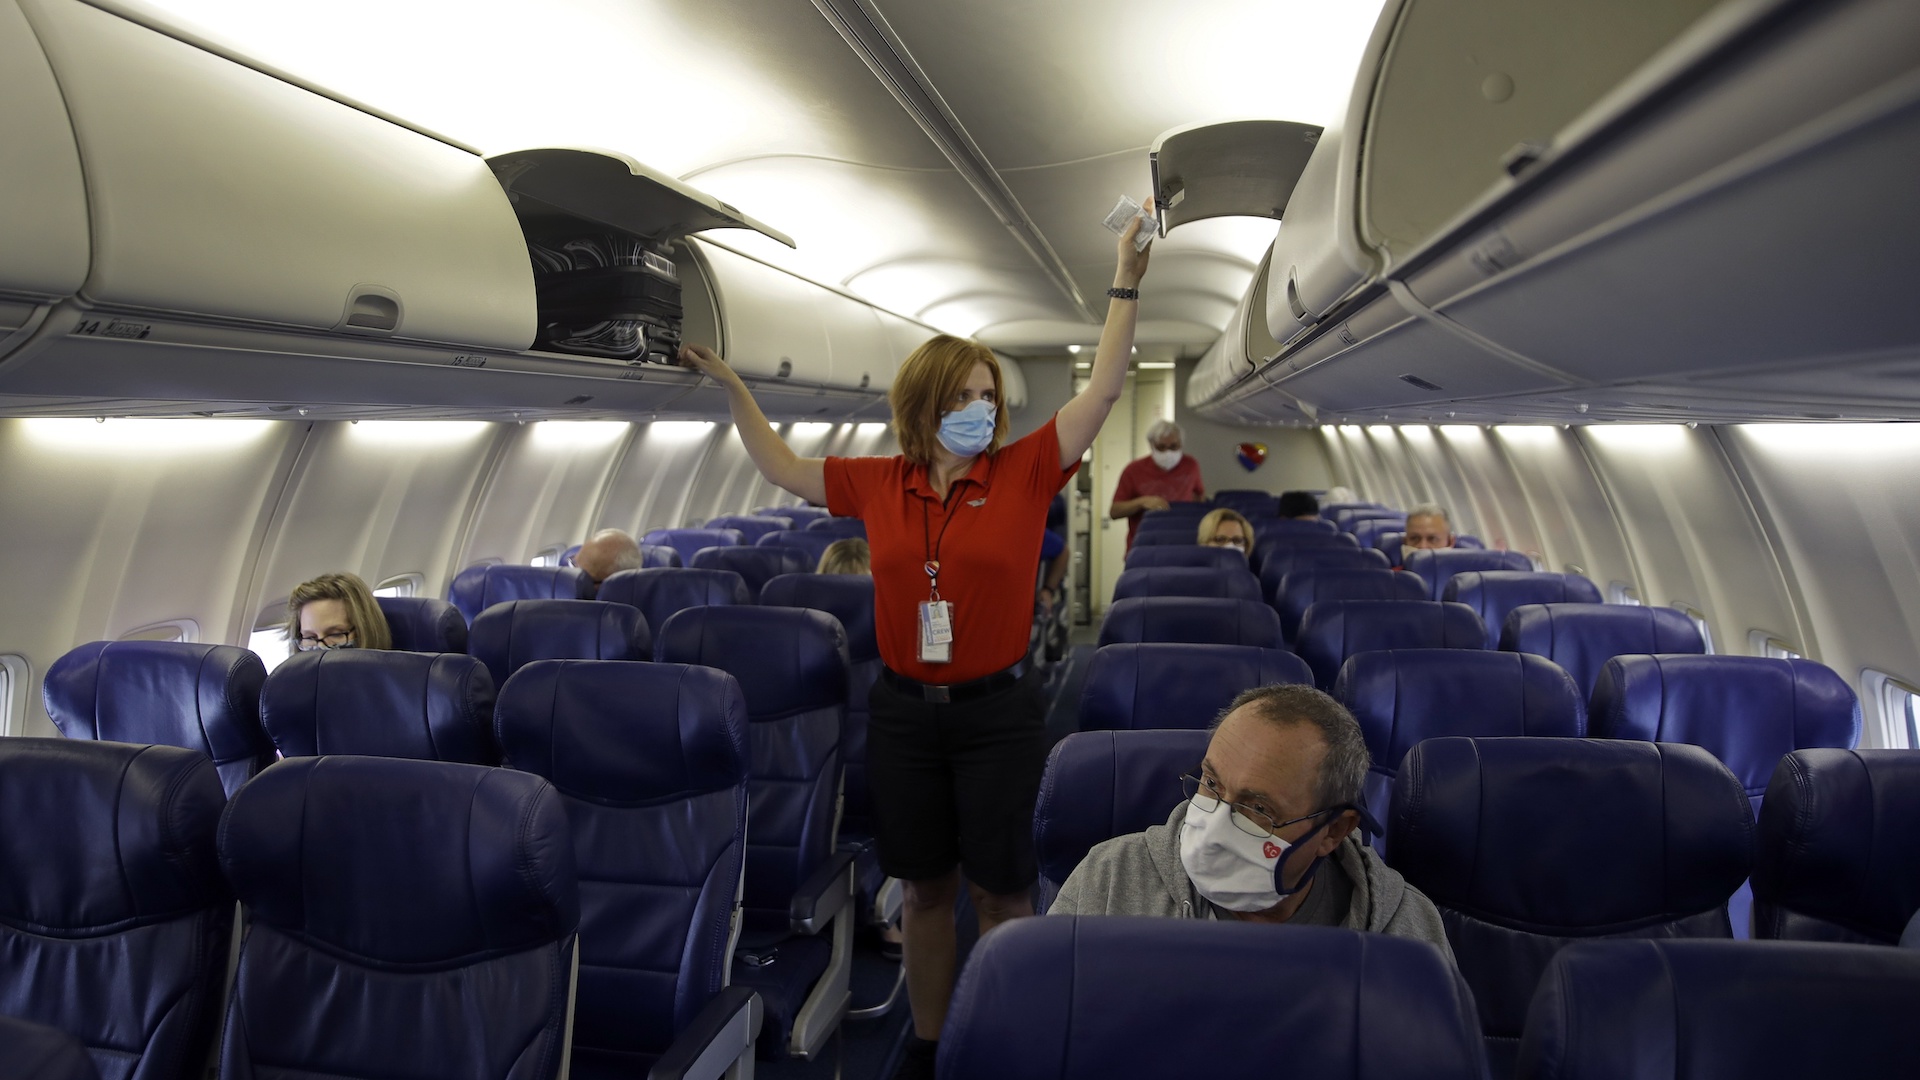 In this May 24, 2020, file photo, a Southwest Airlines flight attendant prepares a plane bound for Orlando, Fla. for takeoff at Kansas City International airport in Kansas City, Mo. About 40,000 workers in the airline industry are facing layoffs on Thursday, Oct. 1, unless Congress comes up with another aid package. (AP Photo/Charlie Riedel, File)